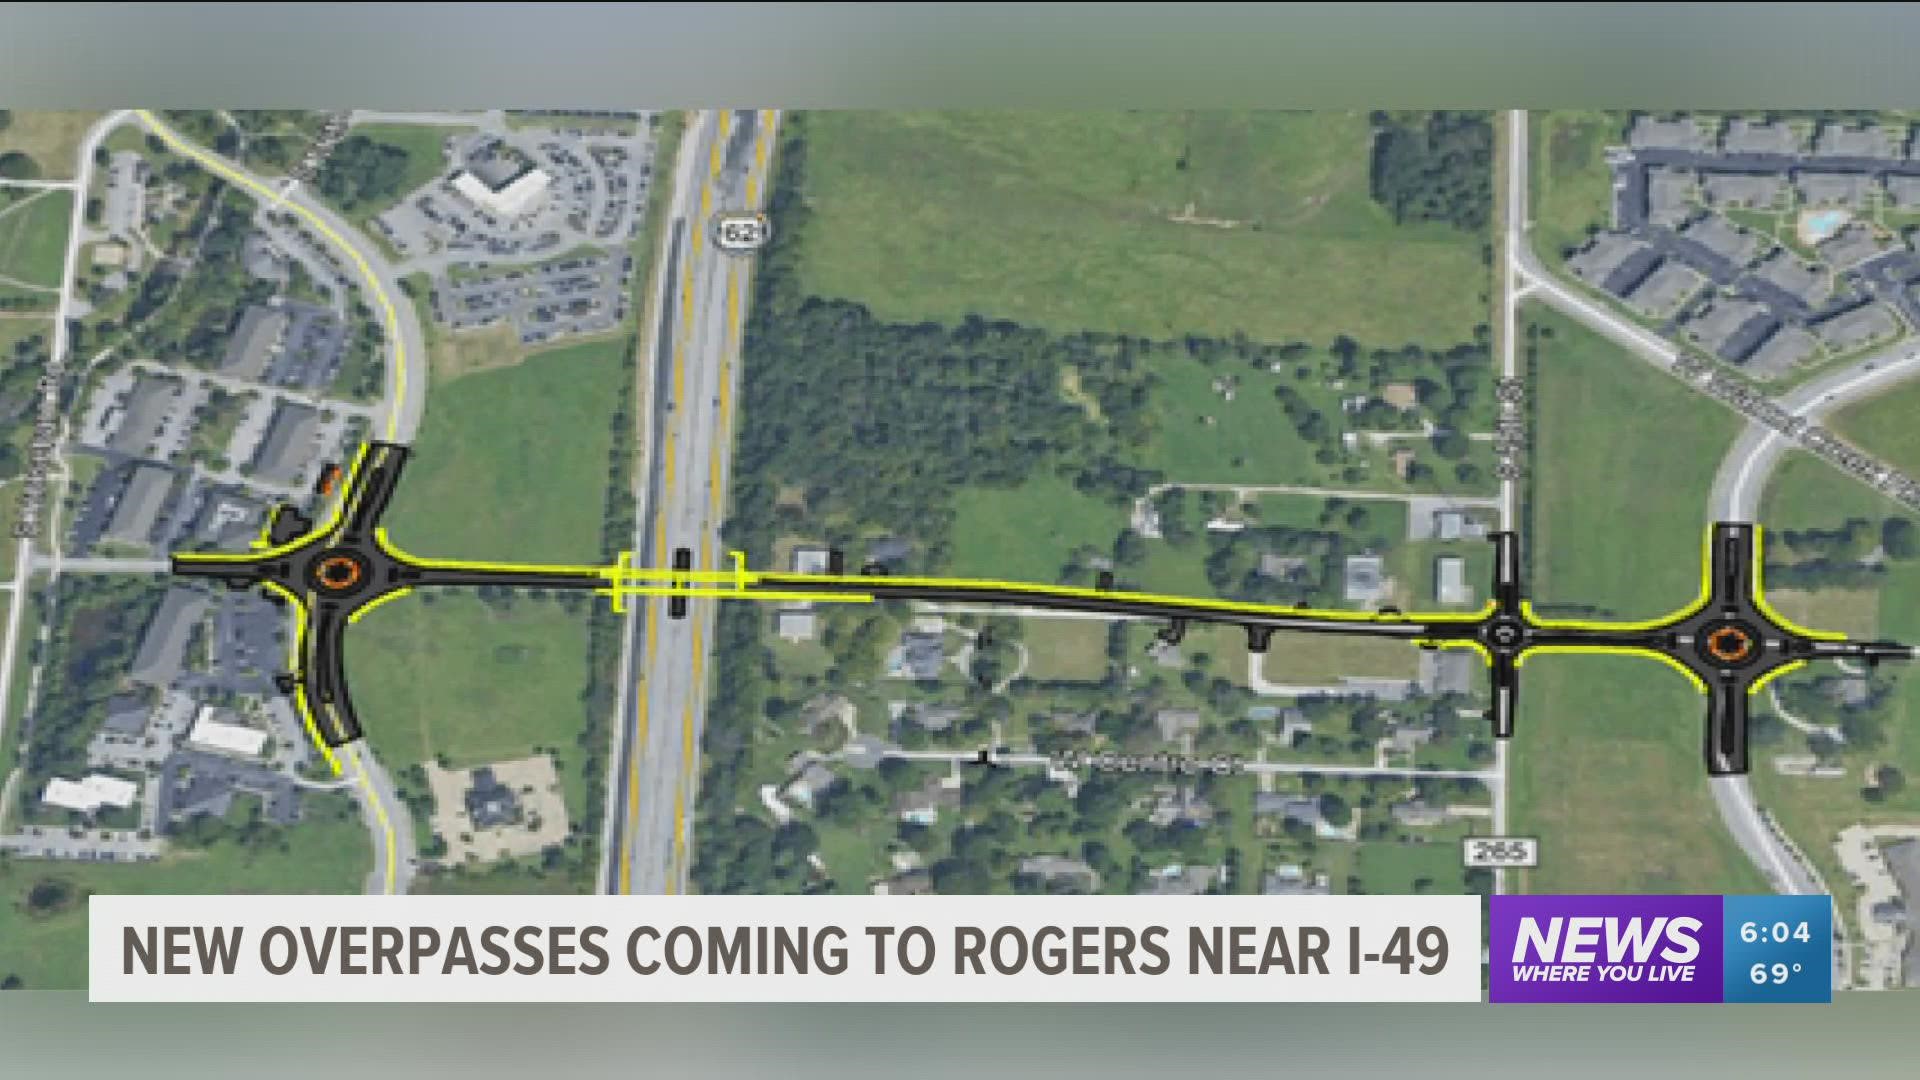 The City of Rogers is looking to clear up the traffic in the area by building two new overpasses near 1-49.